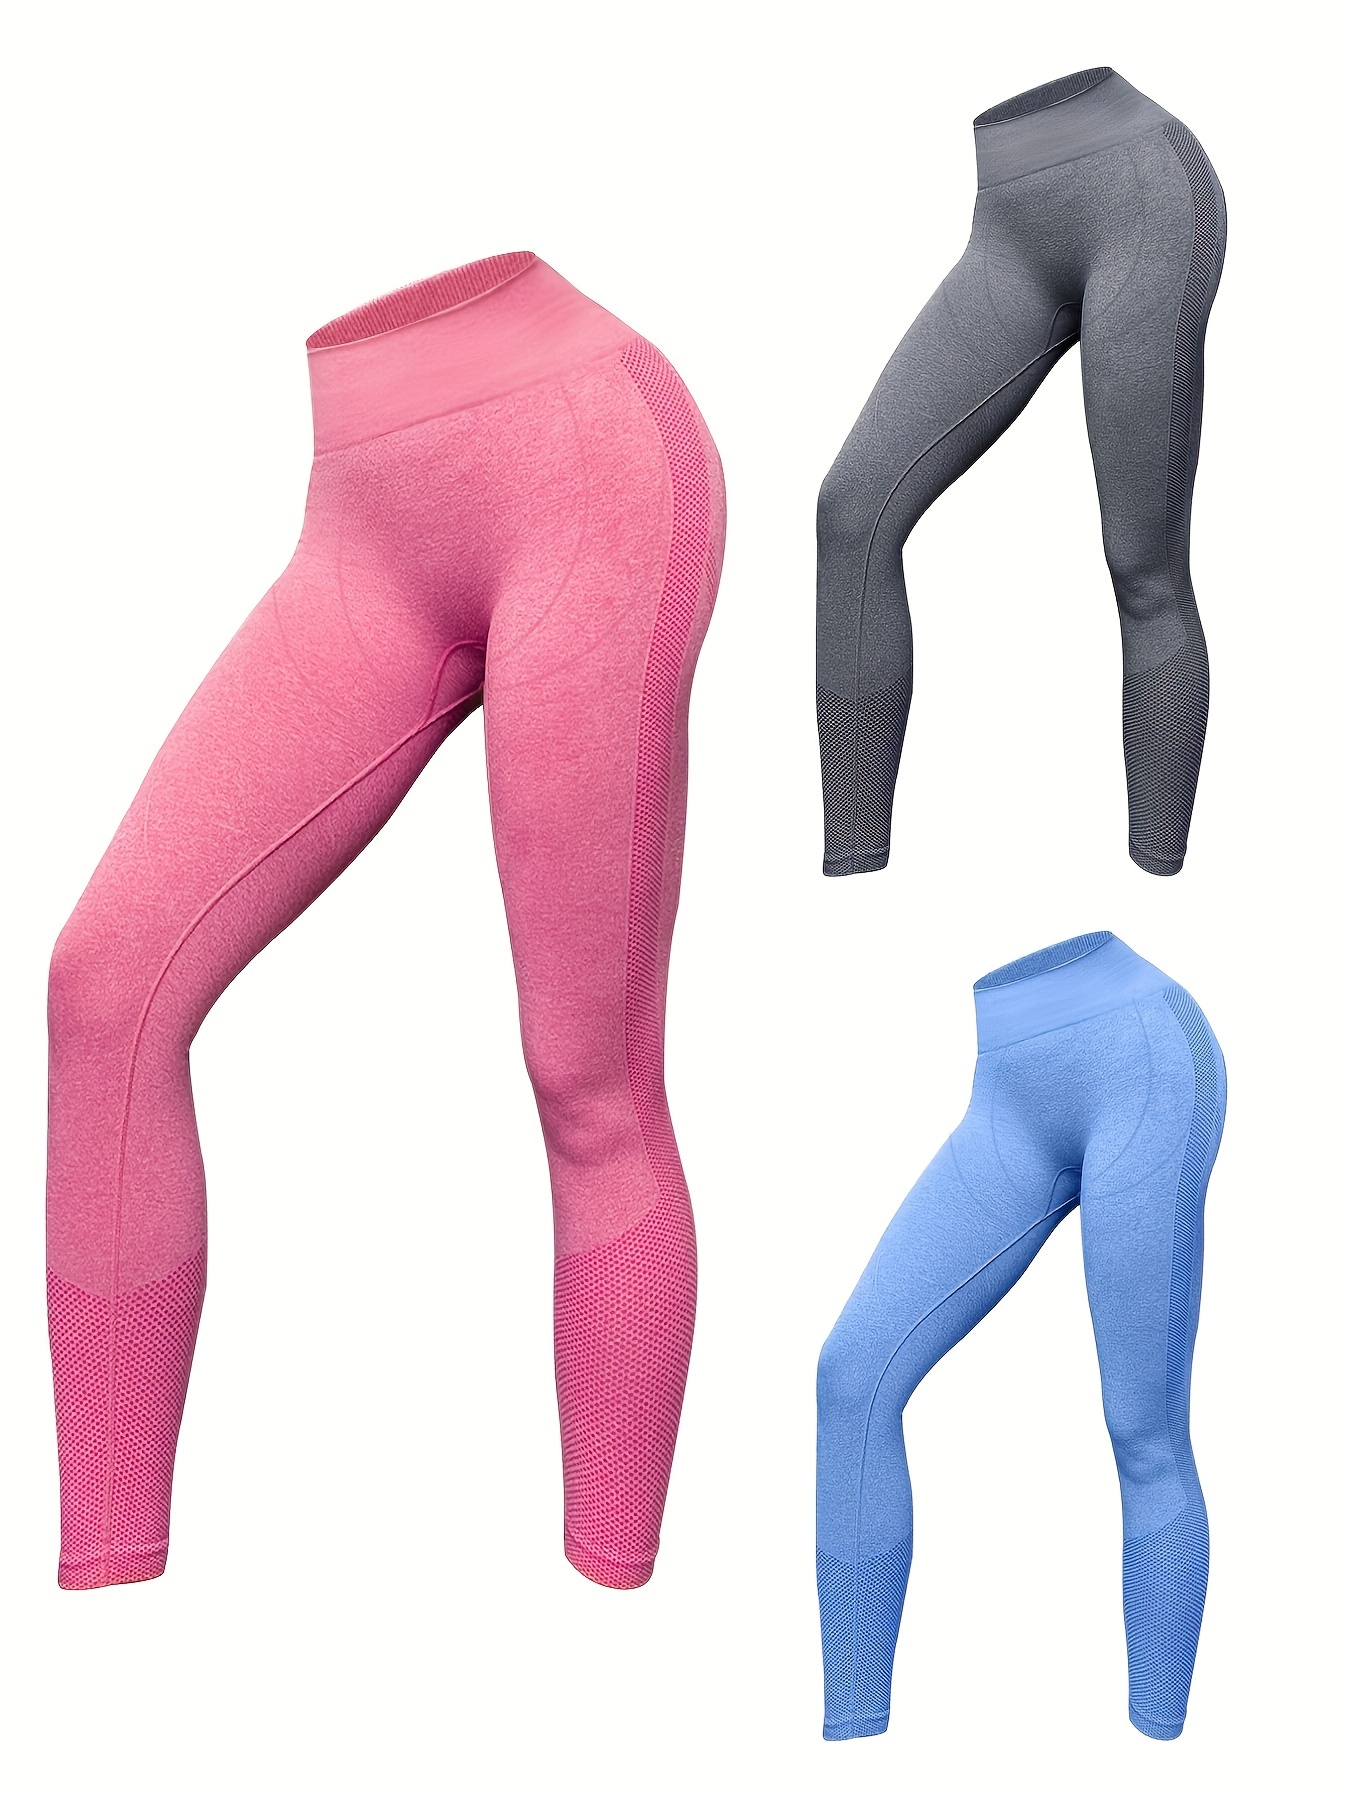 High Waisted Leggings for Women Buttlifting Body Shaper Yoga Pants Athletic  Tummy Control Pants for Running Cycling Workout